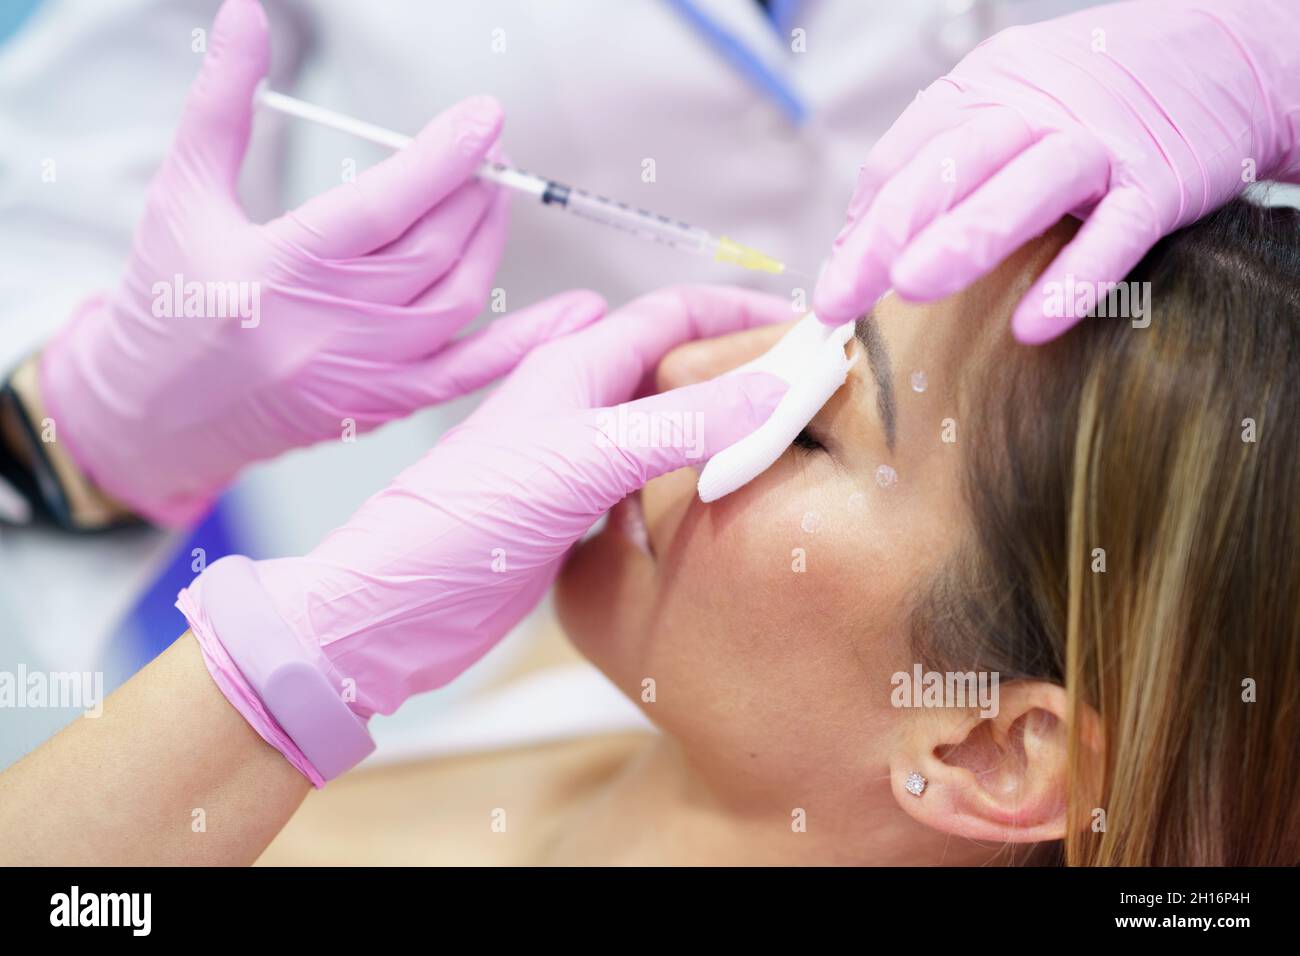 Aesthetic doctor injecting botulinum toxin into the forehead of her middle-aged patient. Stock Photo